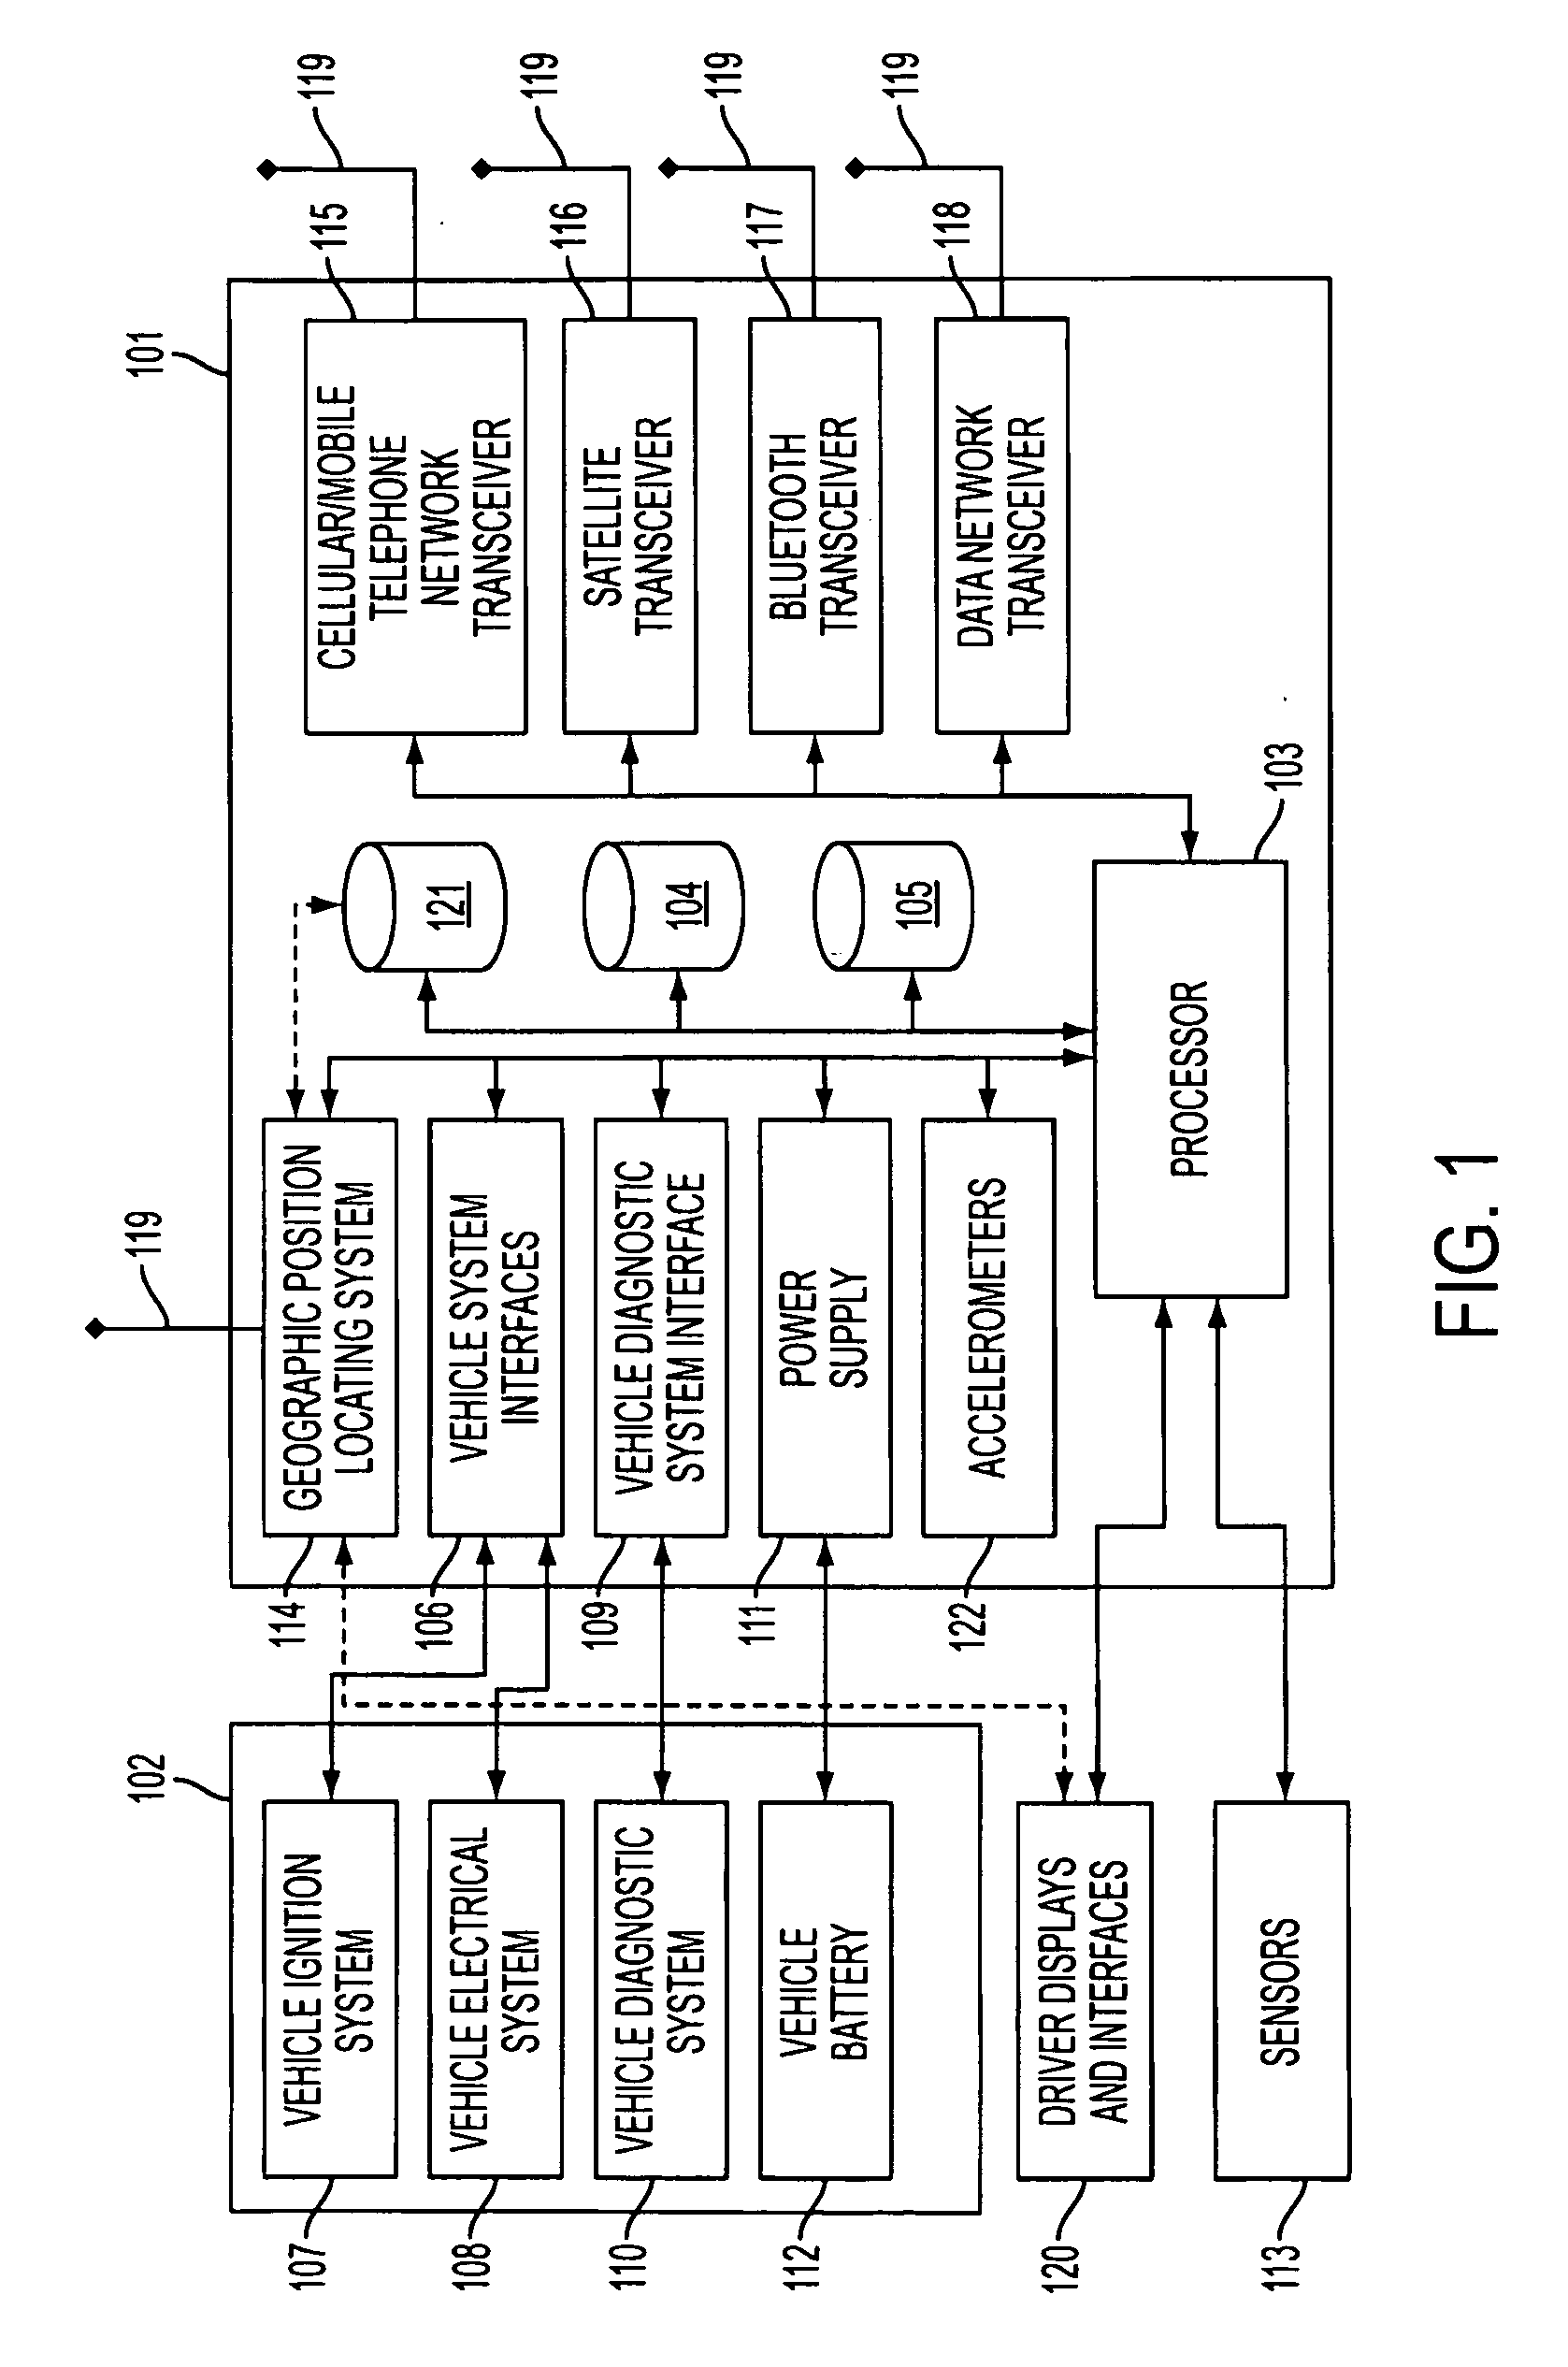 System and method for viewing and correcting data in a street mapping database